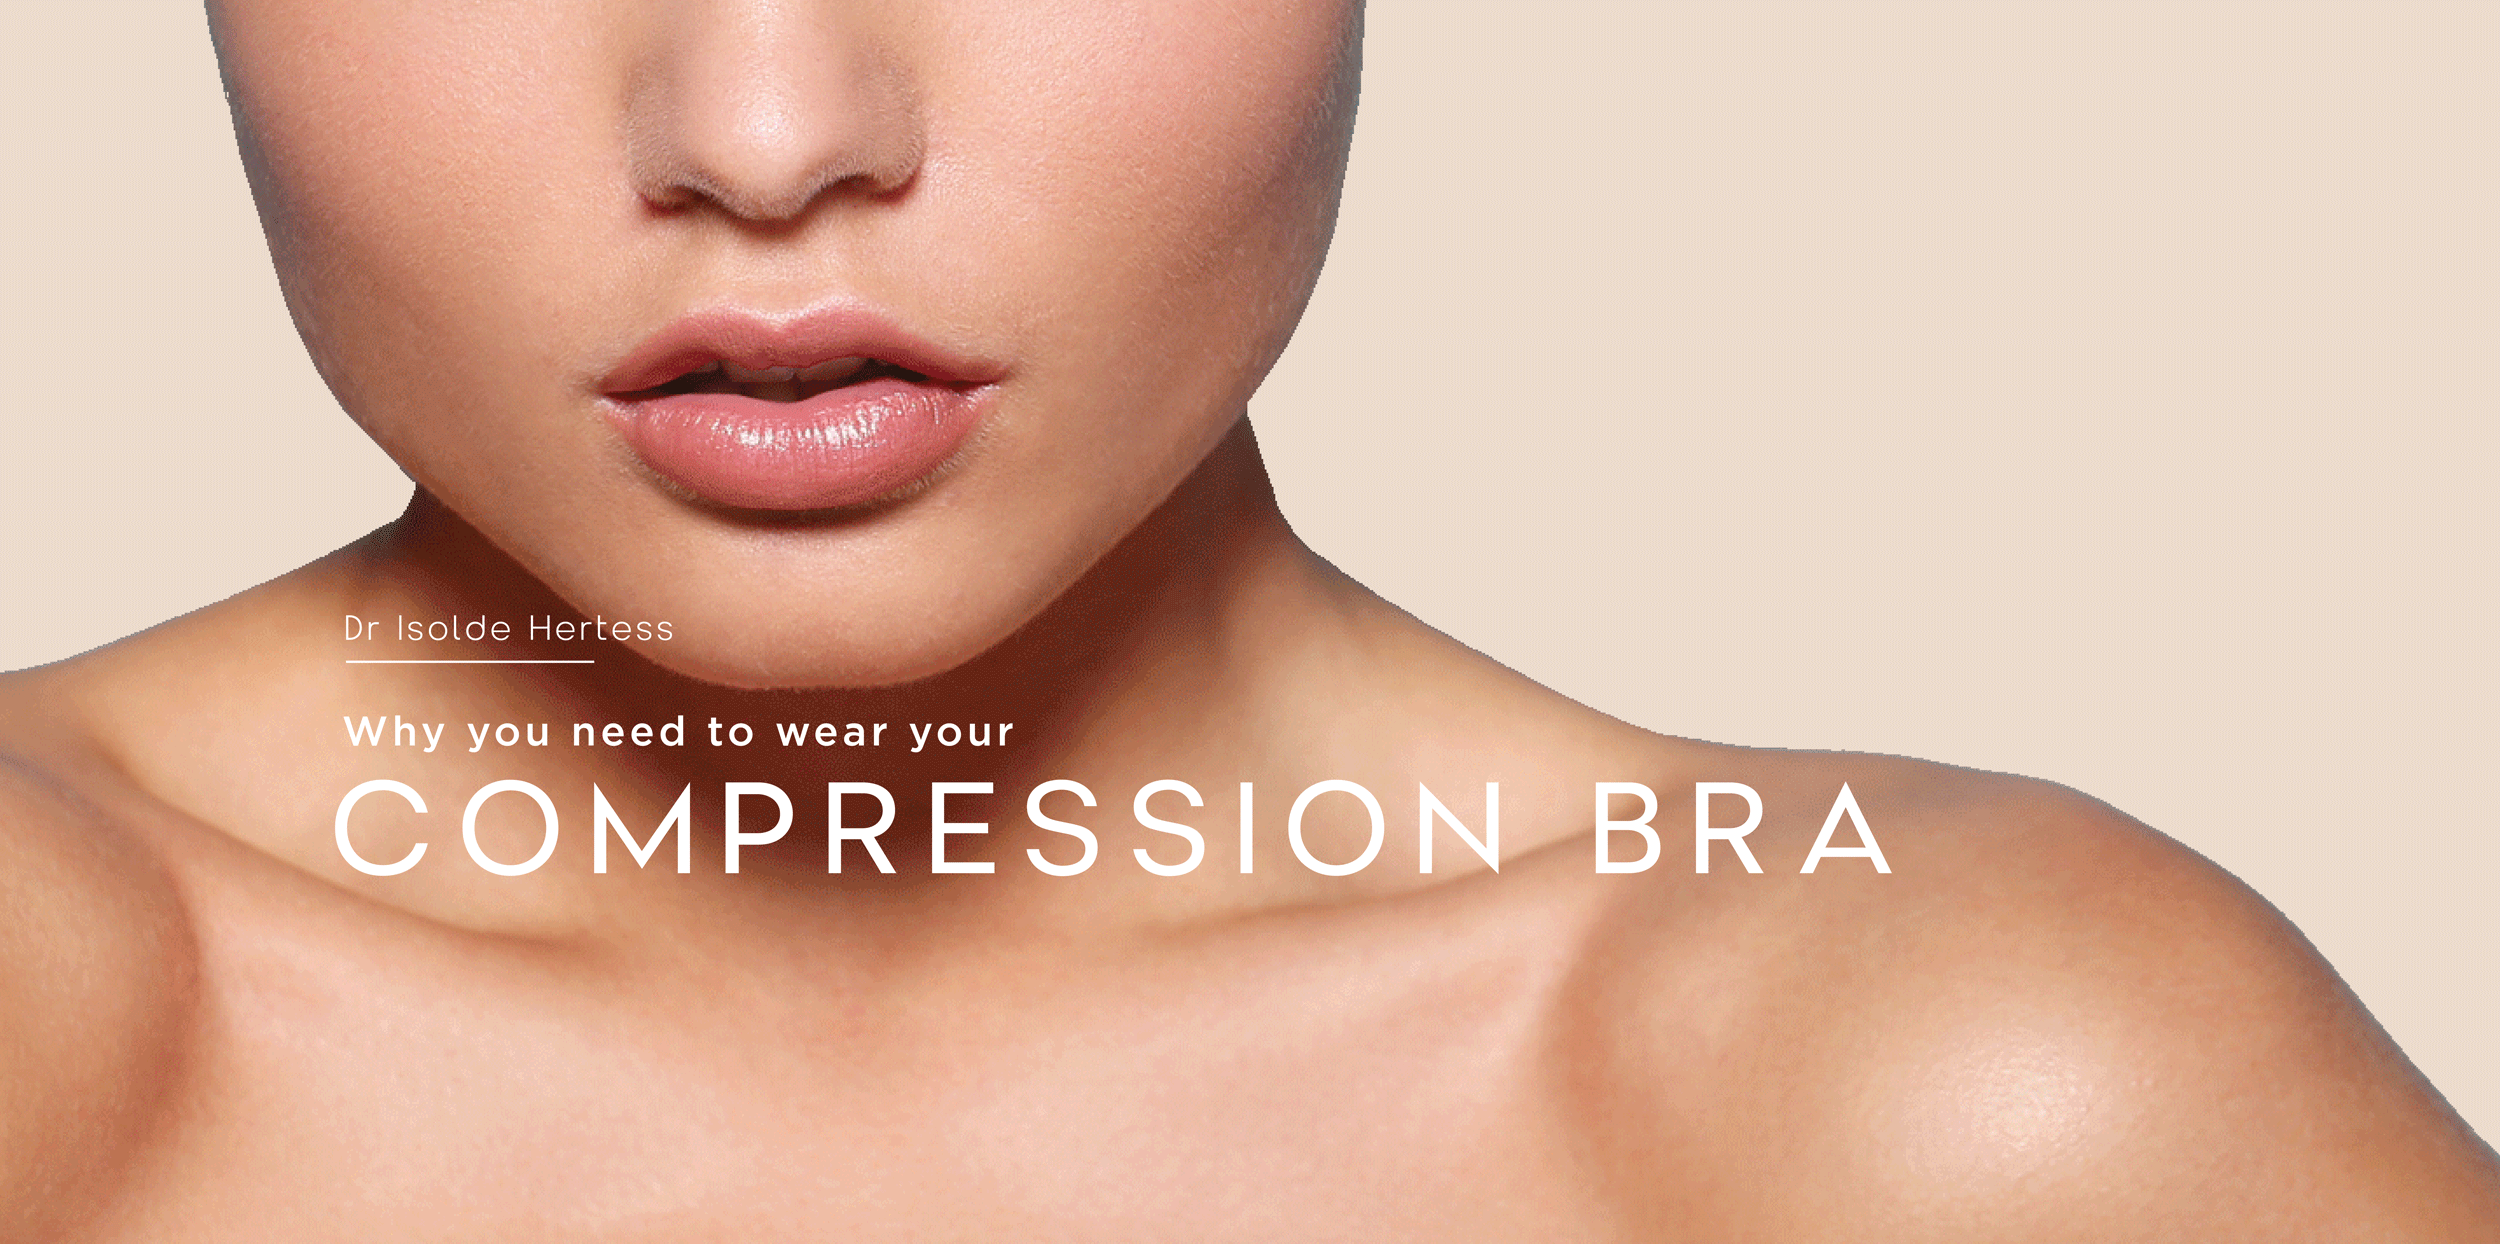 Surgery recovery - why you need to wear your compression bra!